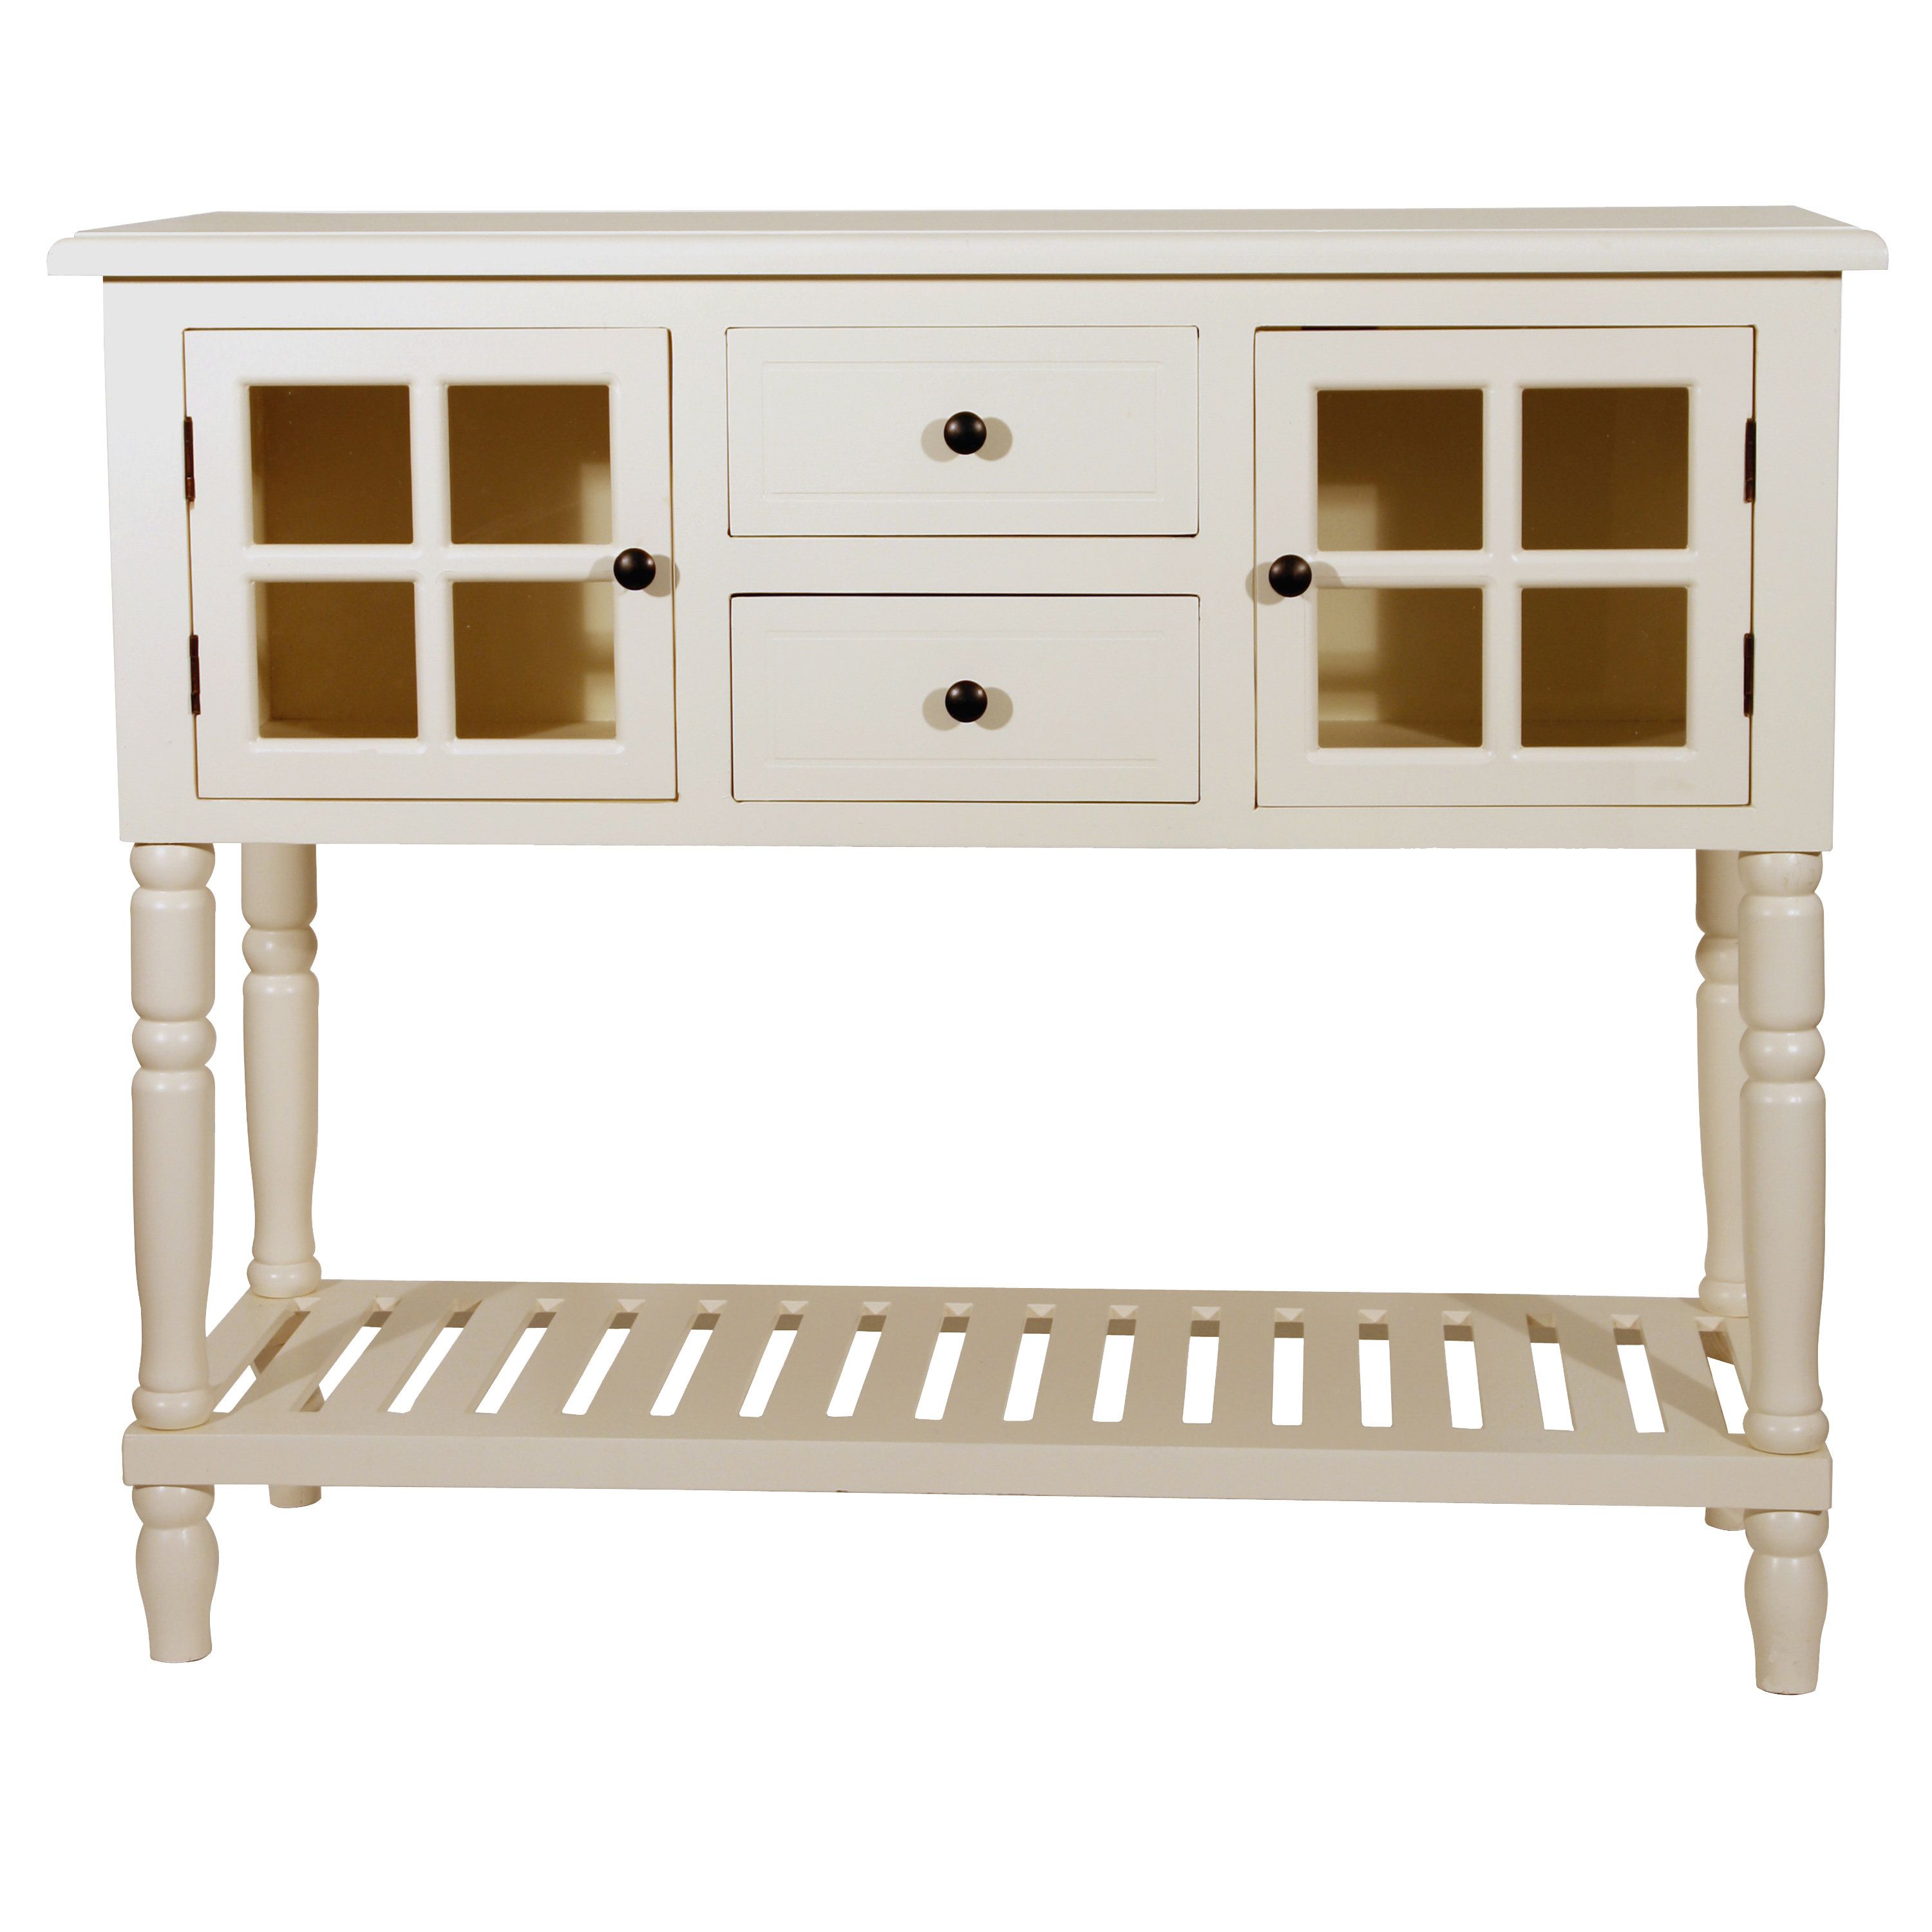 Antique White Console Table | Wayfair In Antique White Distressed Console Tables (View 9 of 20)